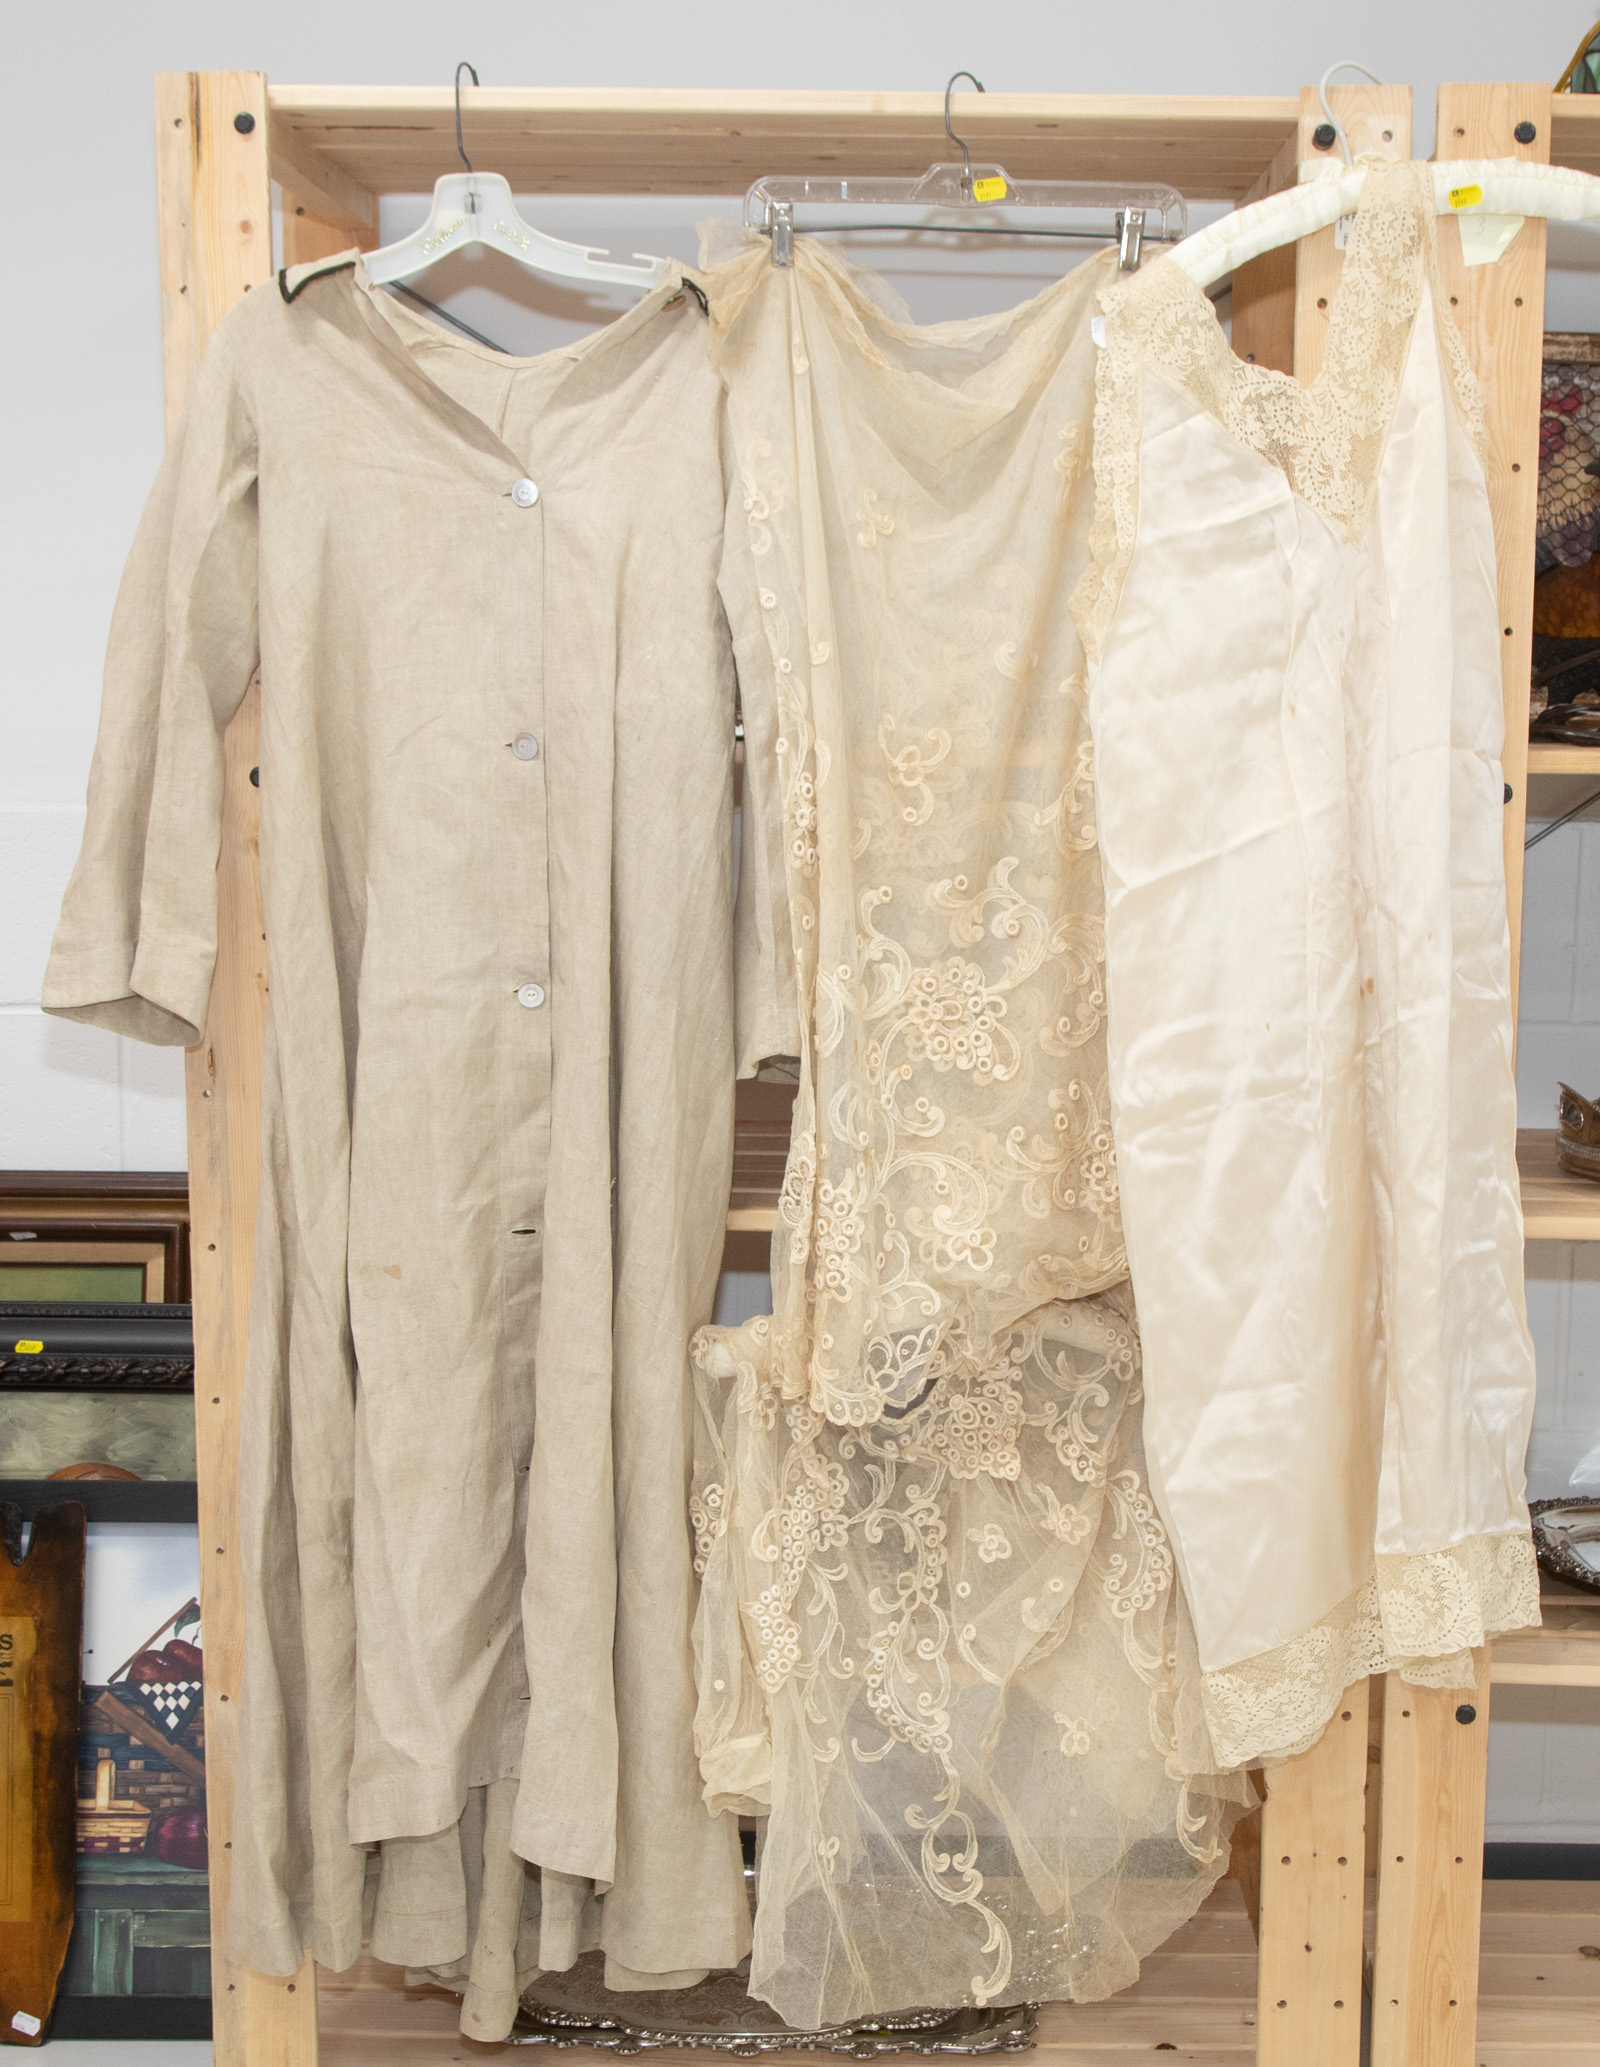 GROUP OF HISTORICAL CLOTHING Including